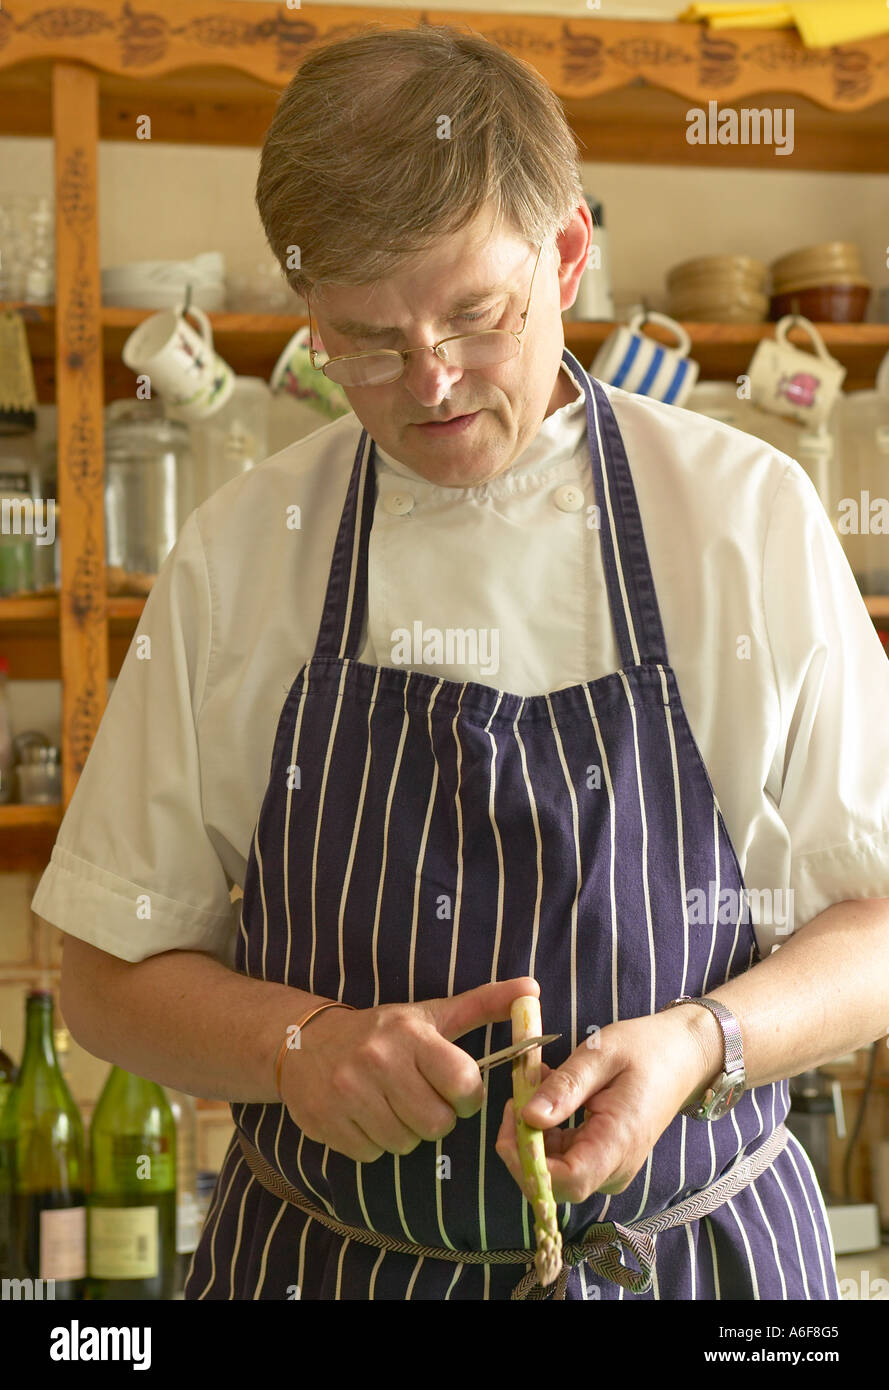 chef preparing food in country hotel kitchen Stock Photo